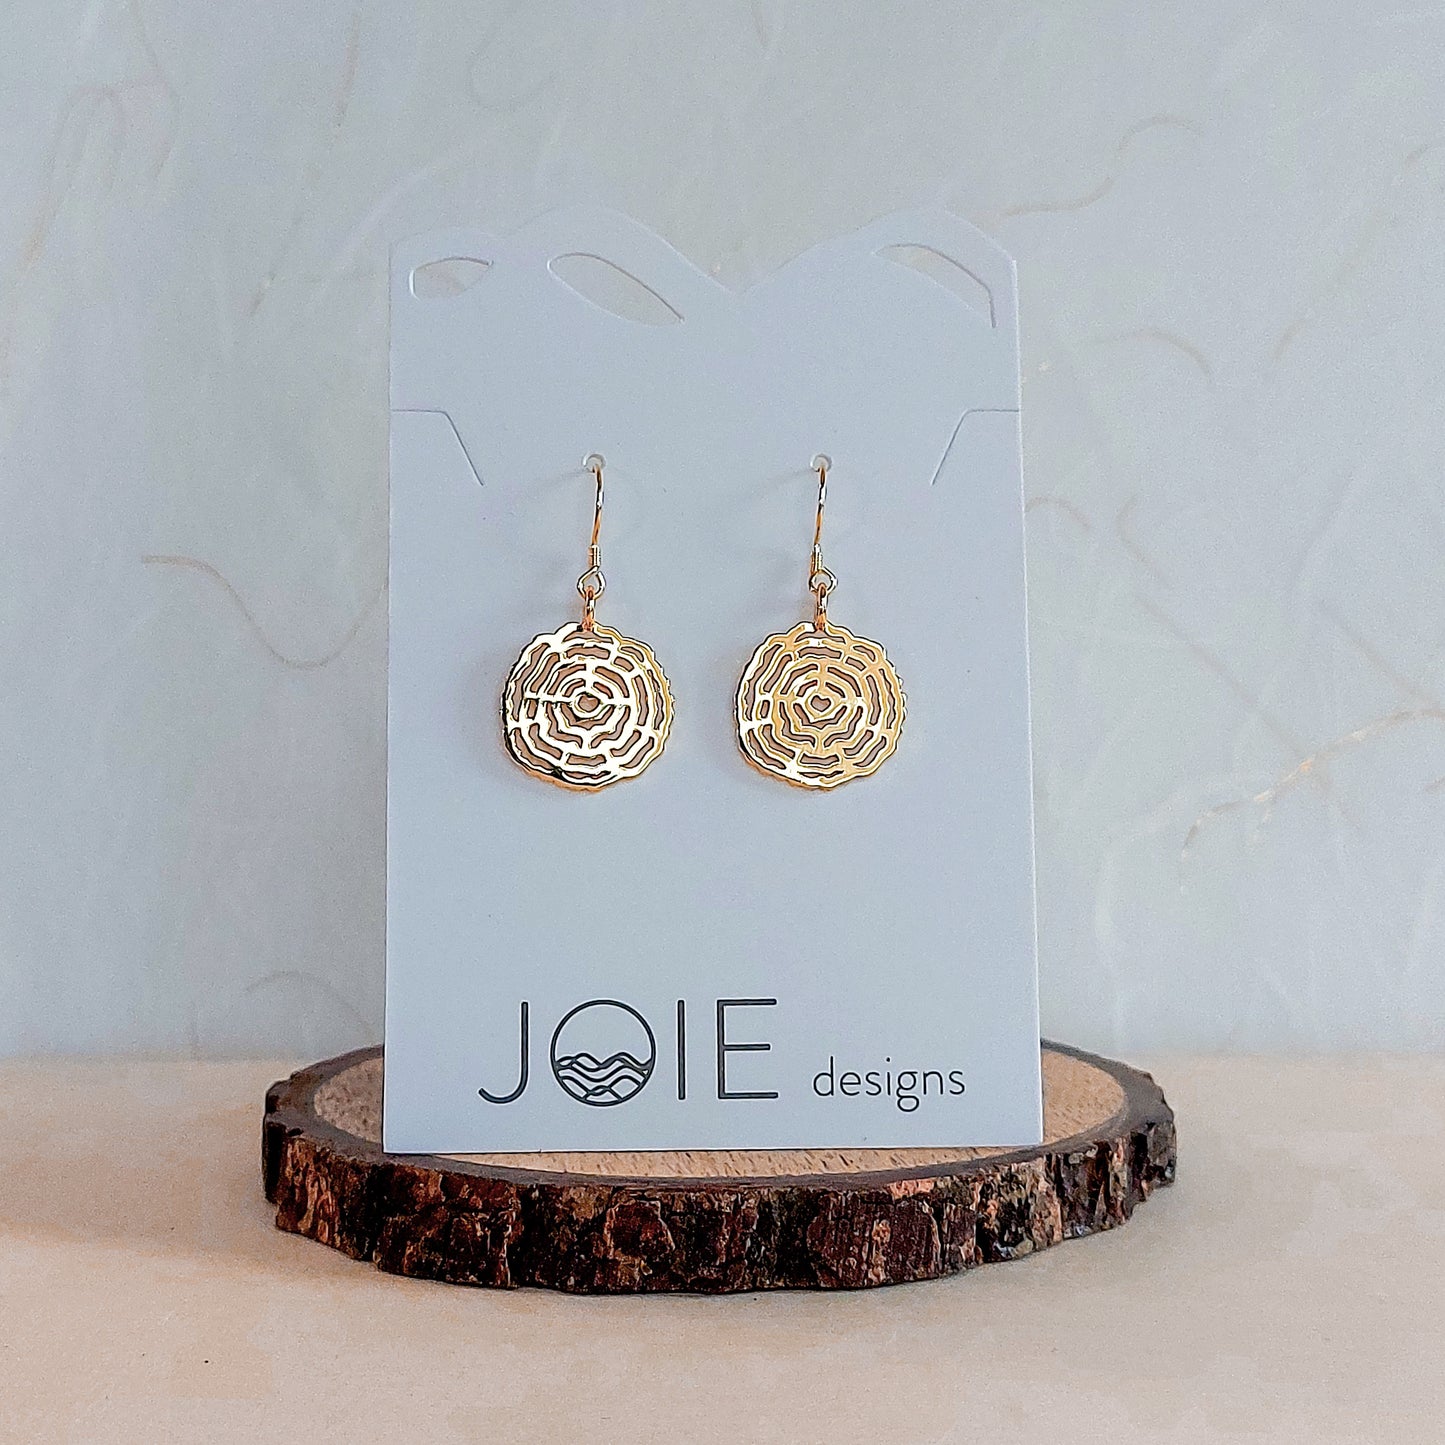 18k18k yellow gold plated tree rings inspired earrings showcased on a jewellery card